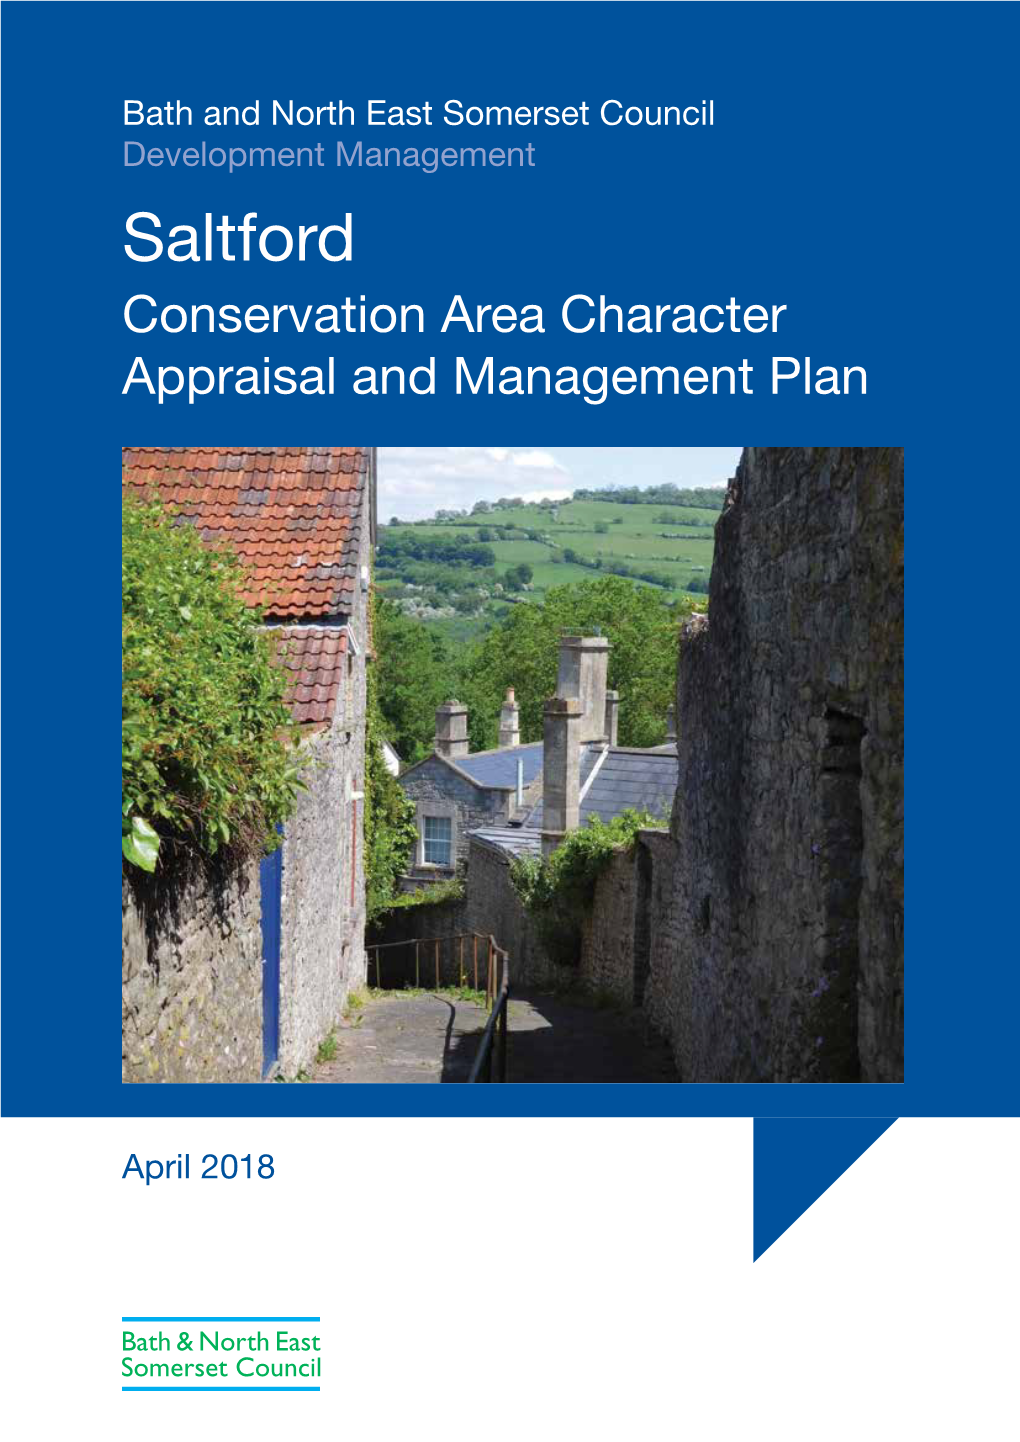 Saltford Conservation Area Character Appraisal and Management Plan